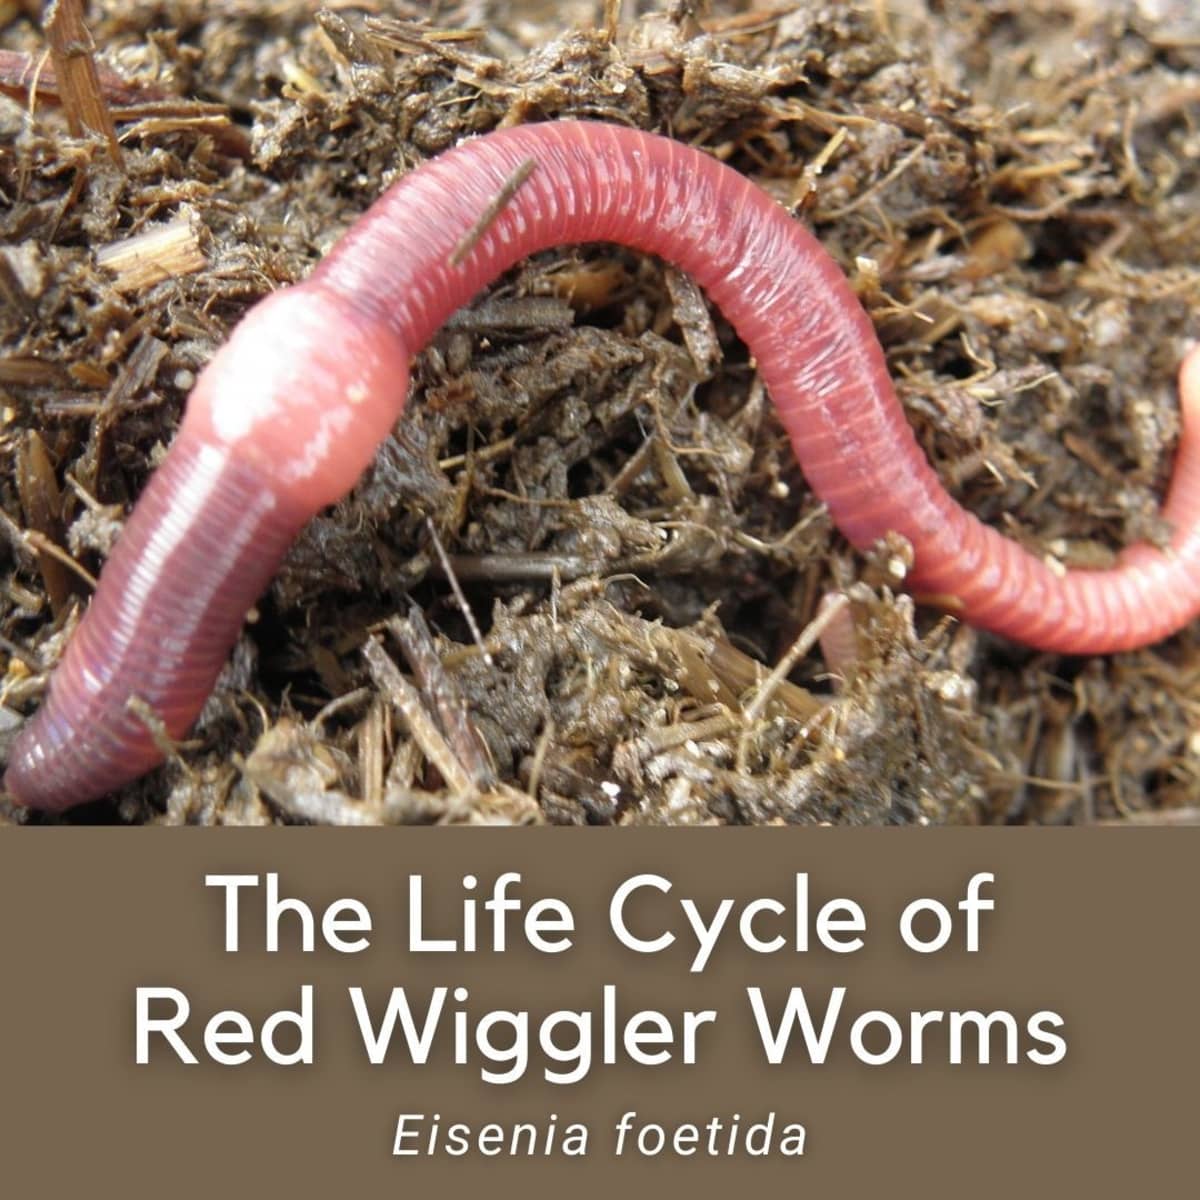 Life Cycle and Stages of Red Wiggler Worms Dengarden